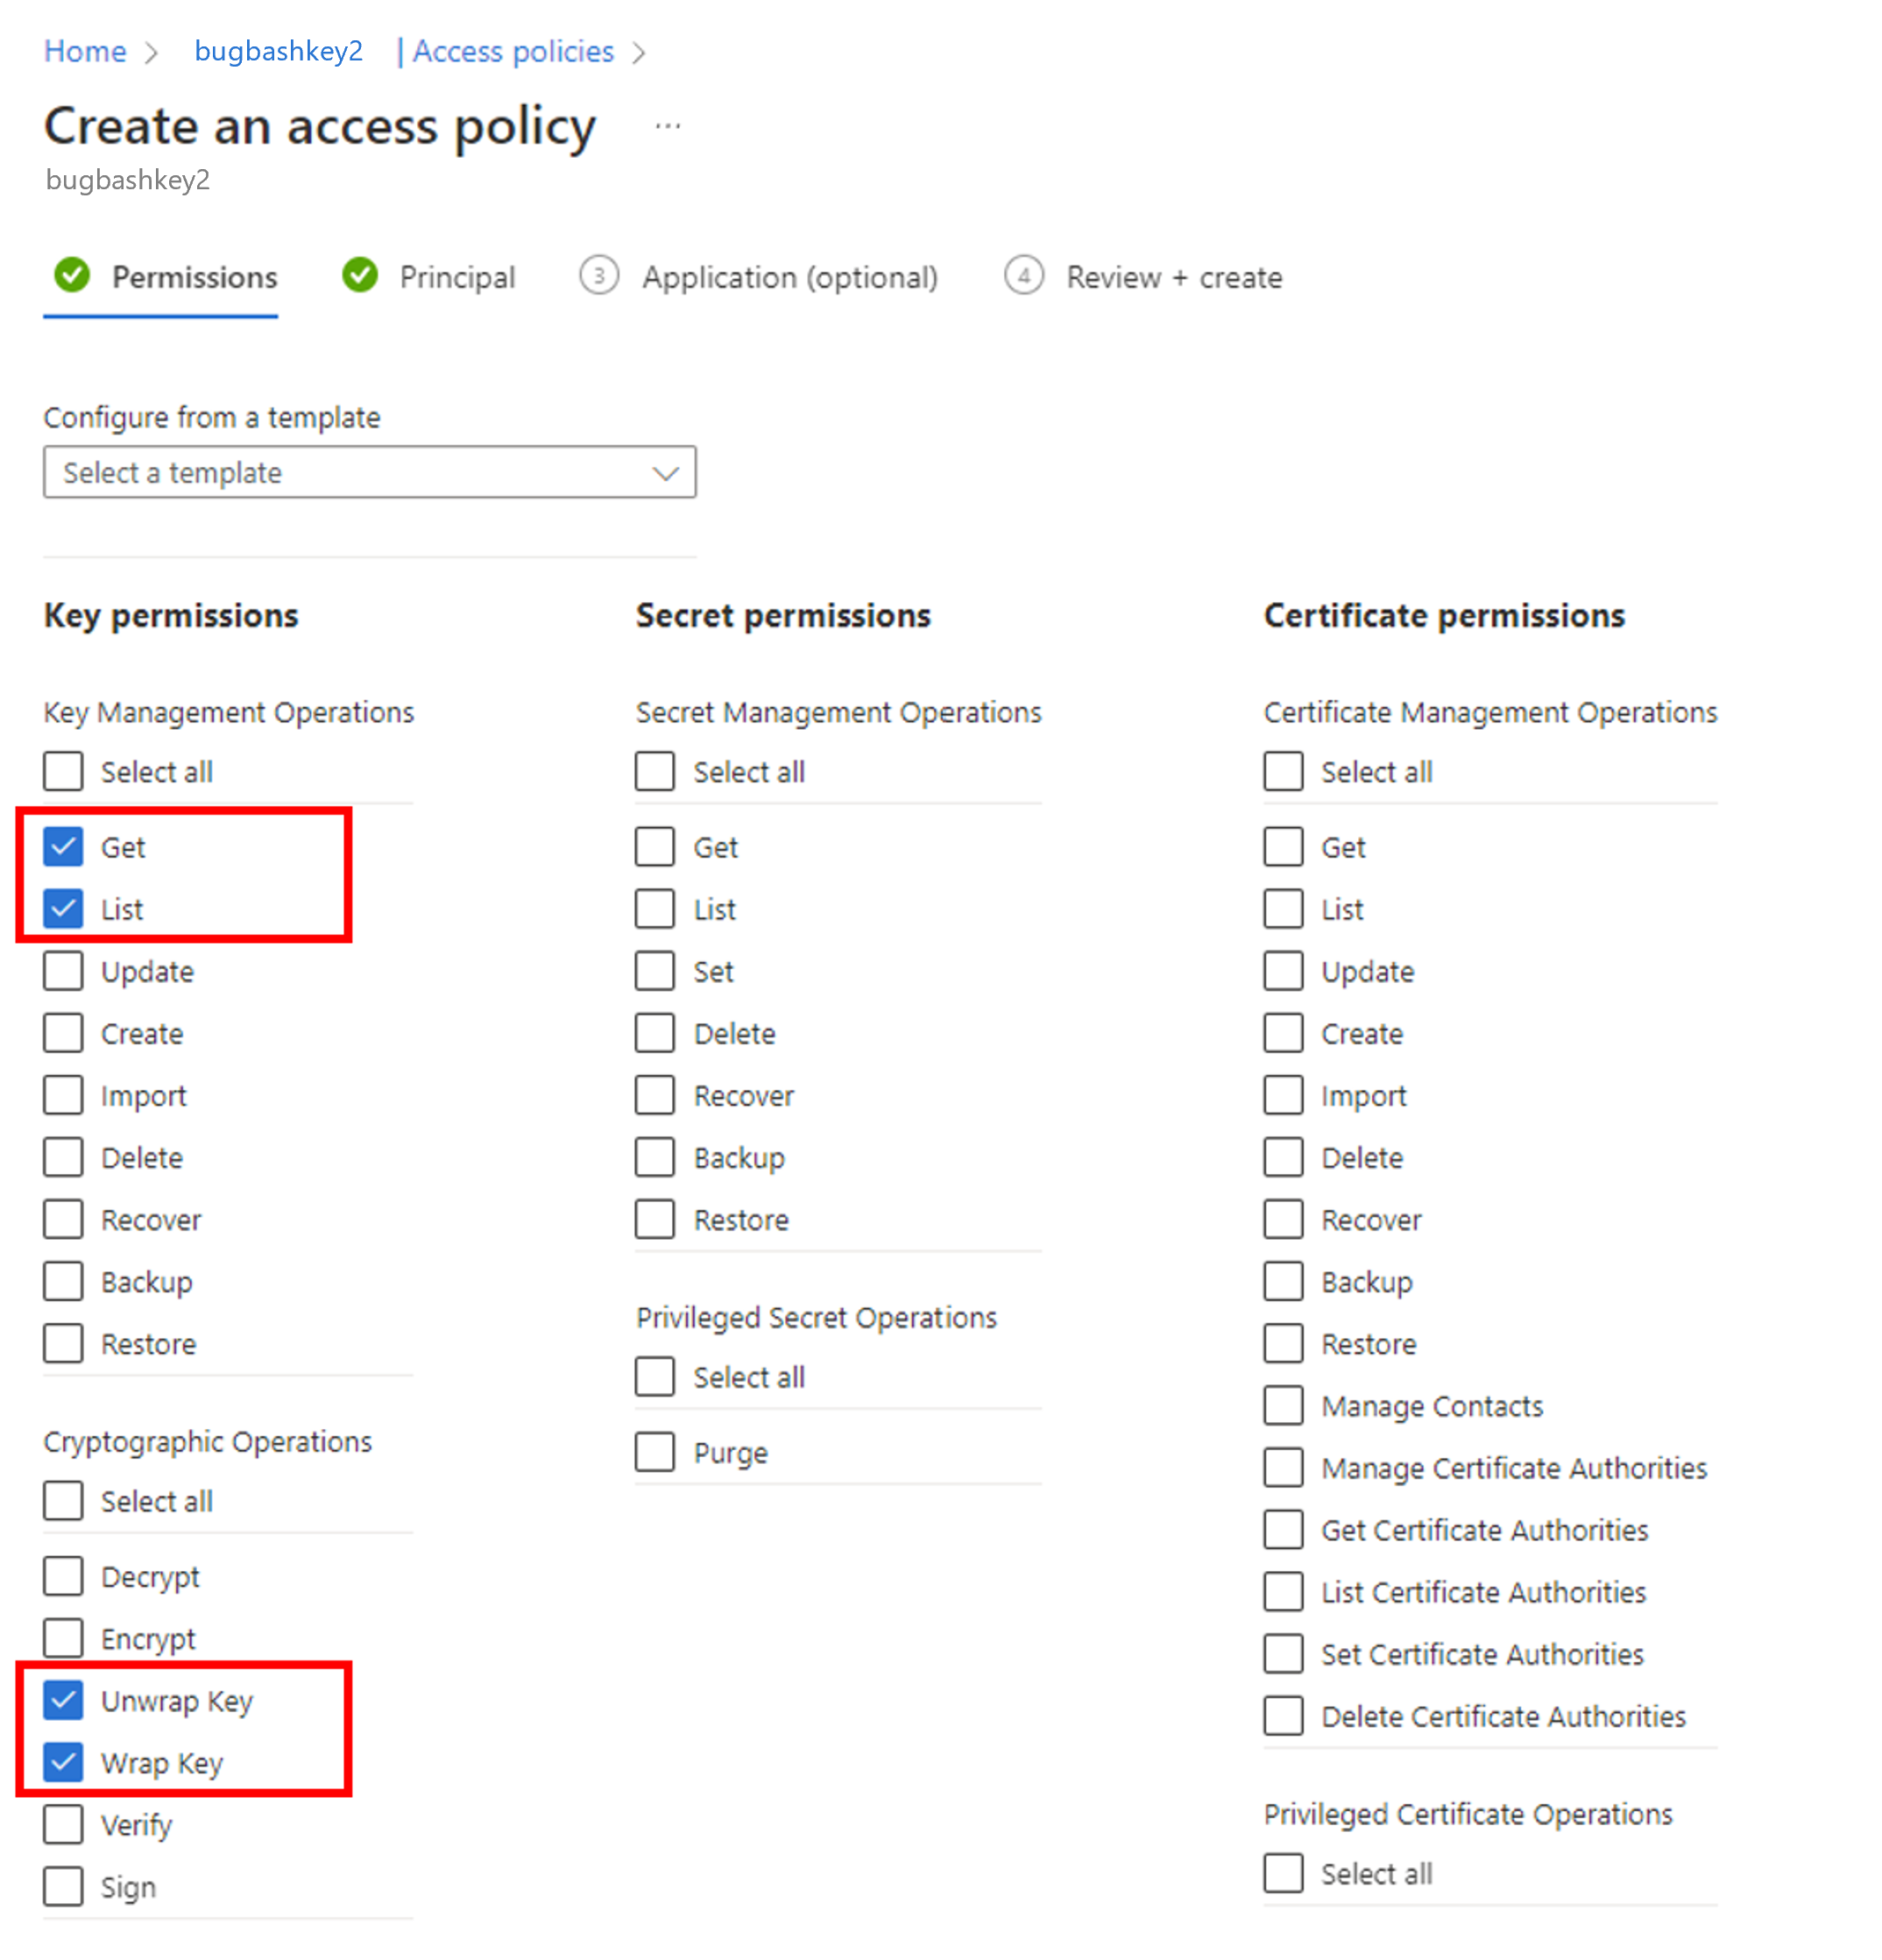 Screenshot of get, list, wrap, and upwrap key access policy